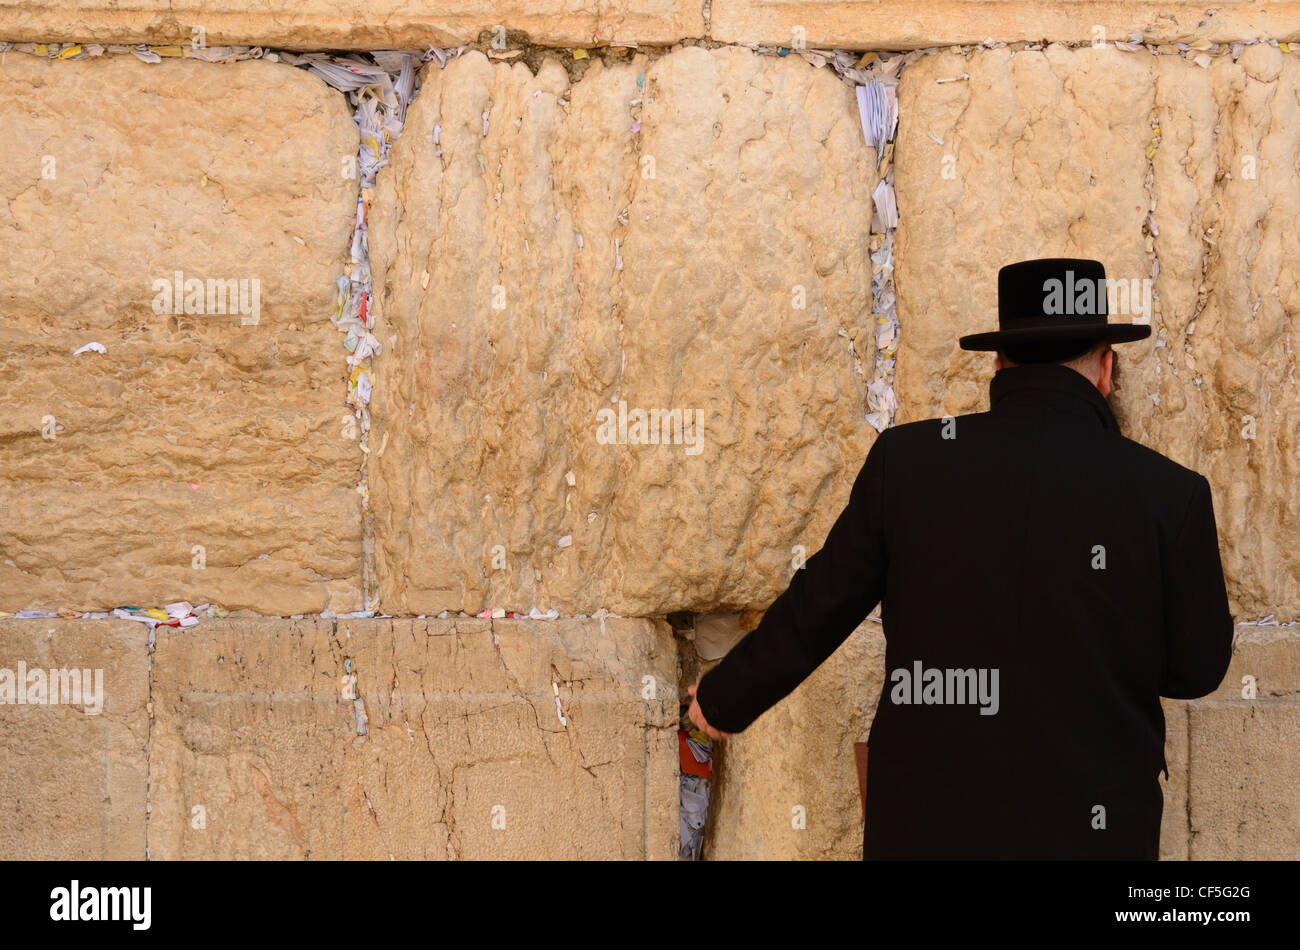 A Hasidic Jew prays at the wailing wall in the Old City of Jerusalem, Israel. Stock Photo